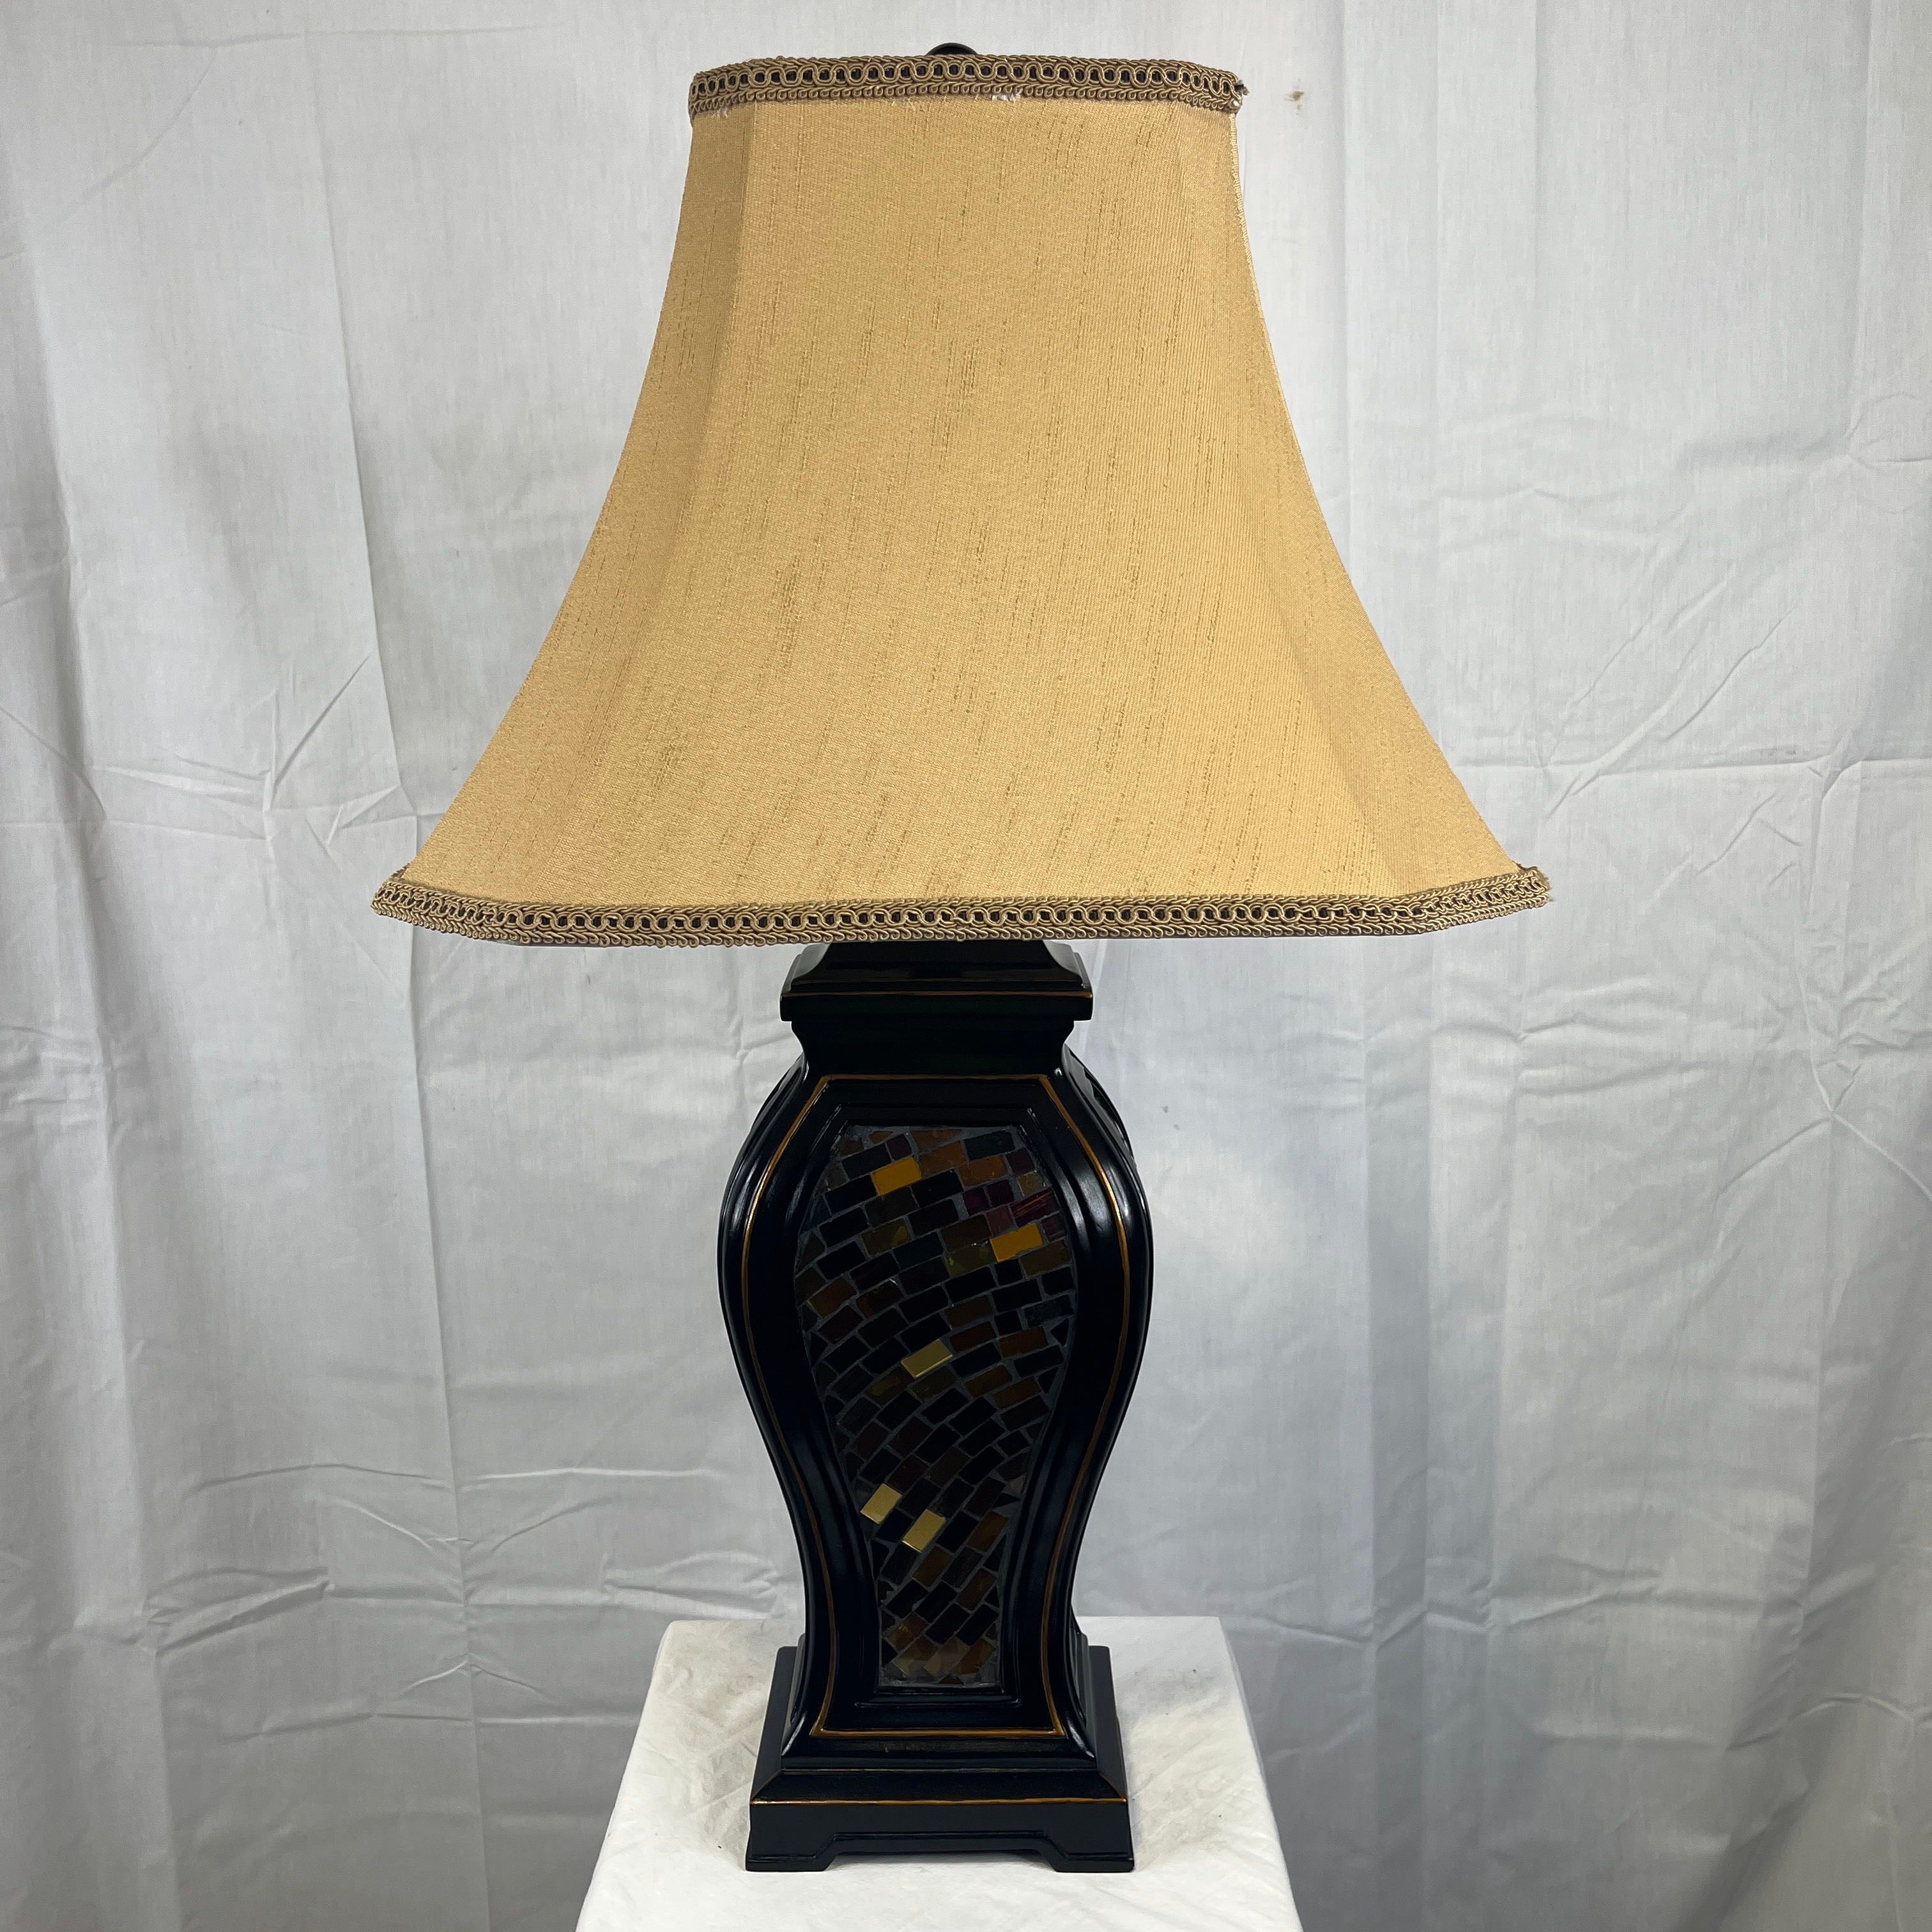 Dark Wood with Mosaic Glass Table Lamp